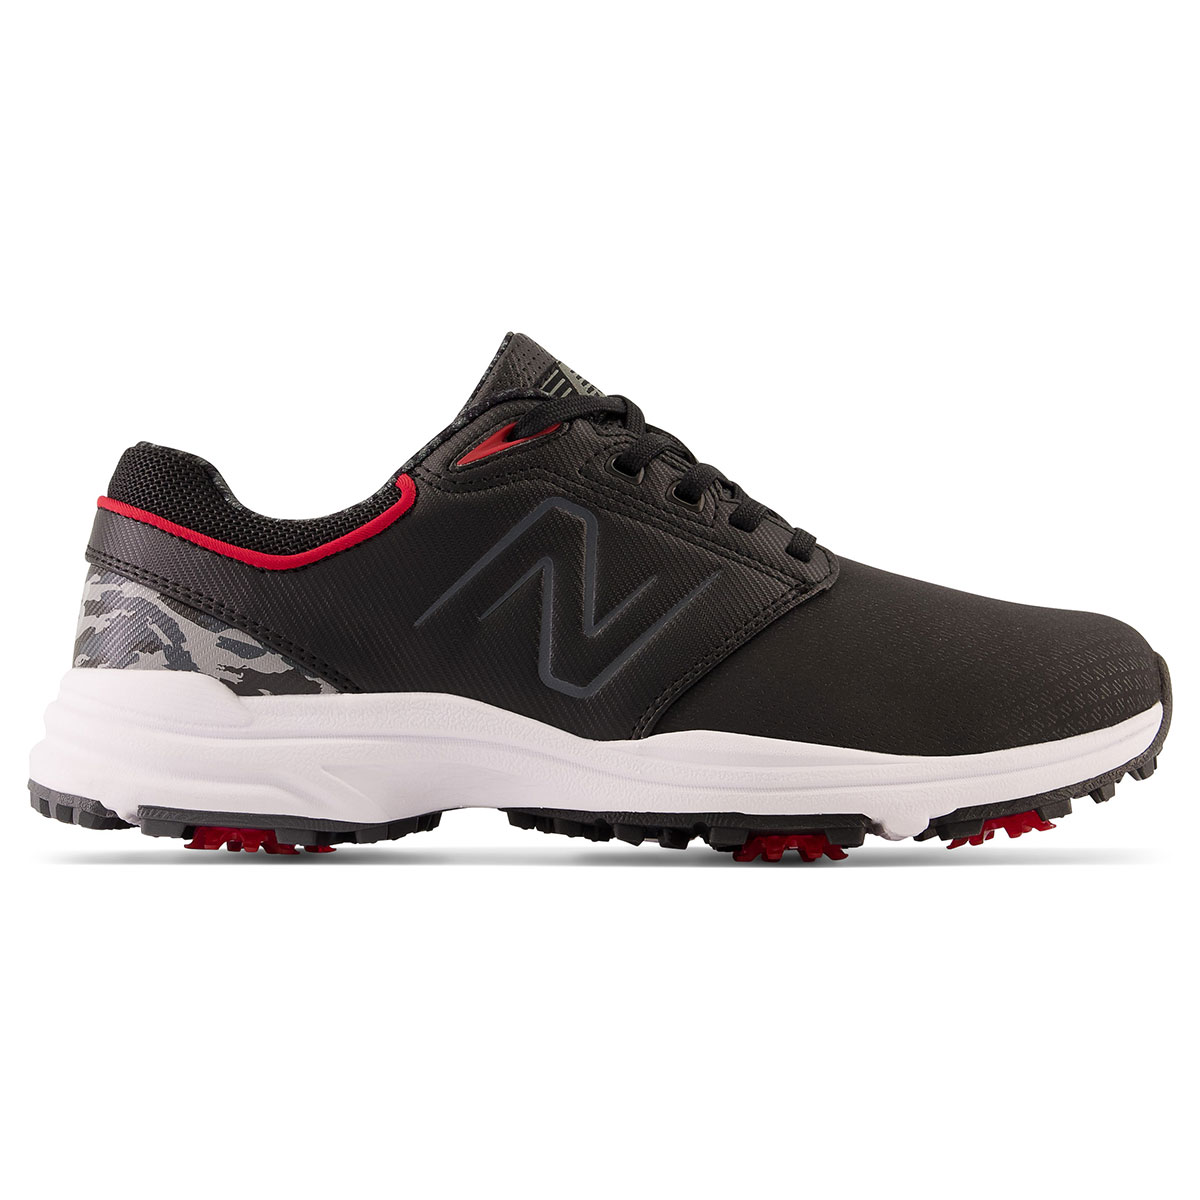 New Balance Men's Brighton Waterproof Spiked Golf Shoes from american golf